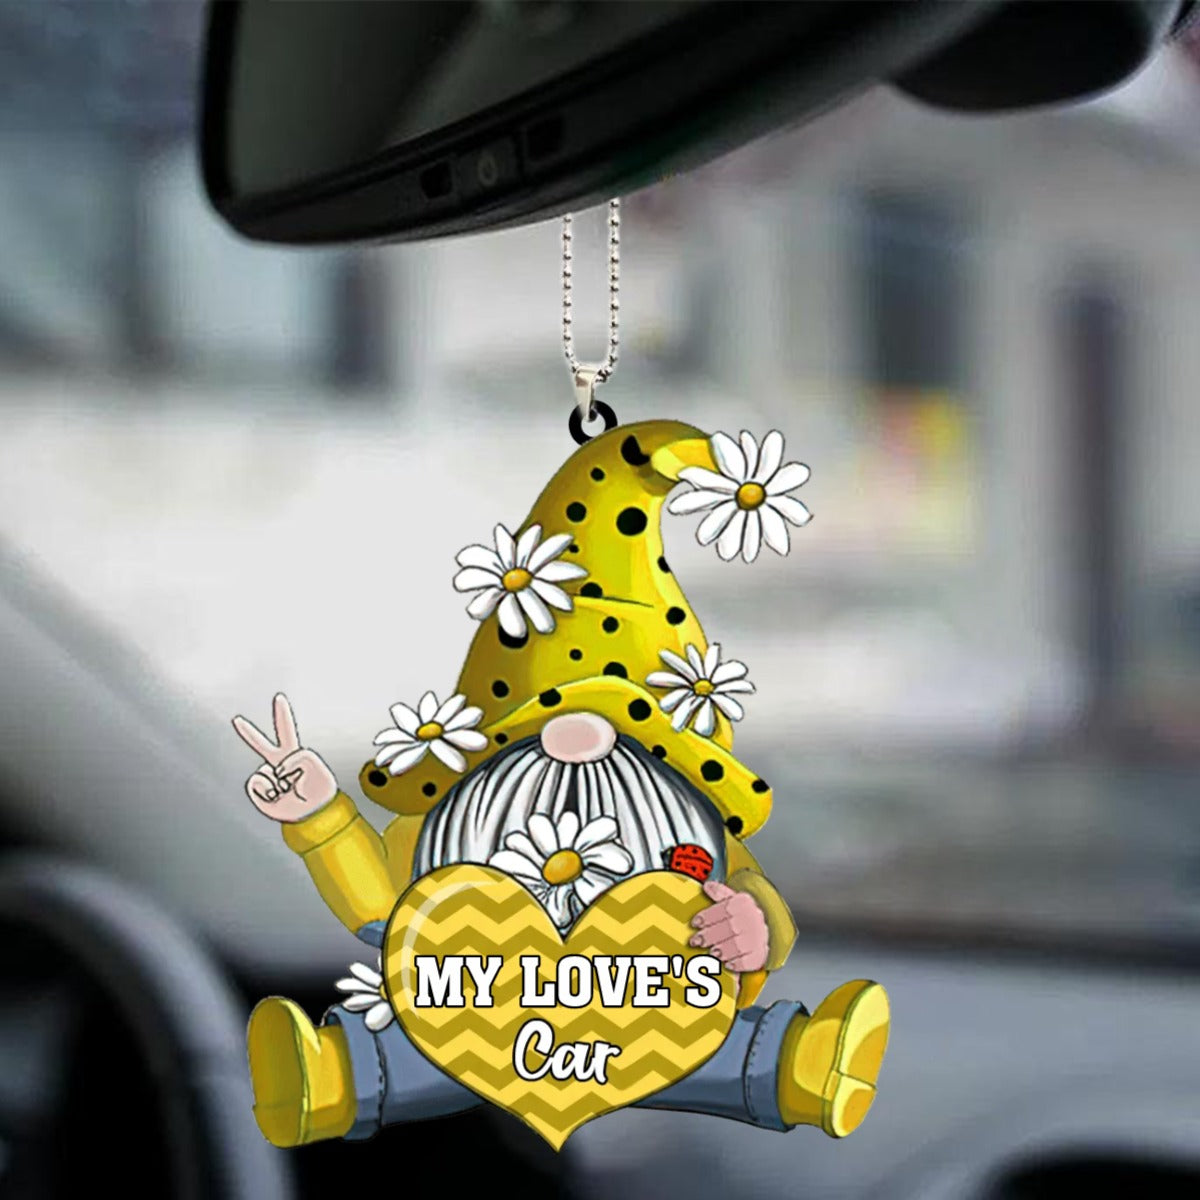 Personalized Shaped Car Acrylic Car Hanging Ornament Gnomes With Hearts Ornaments Interior Car